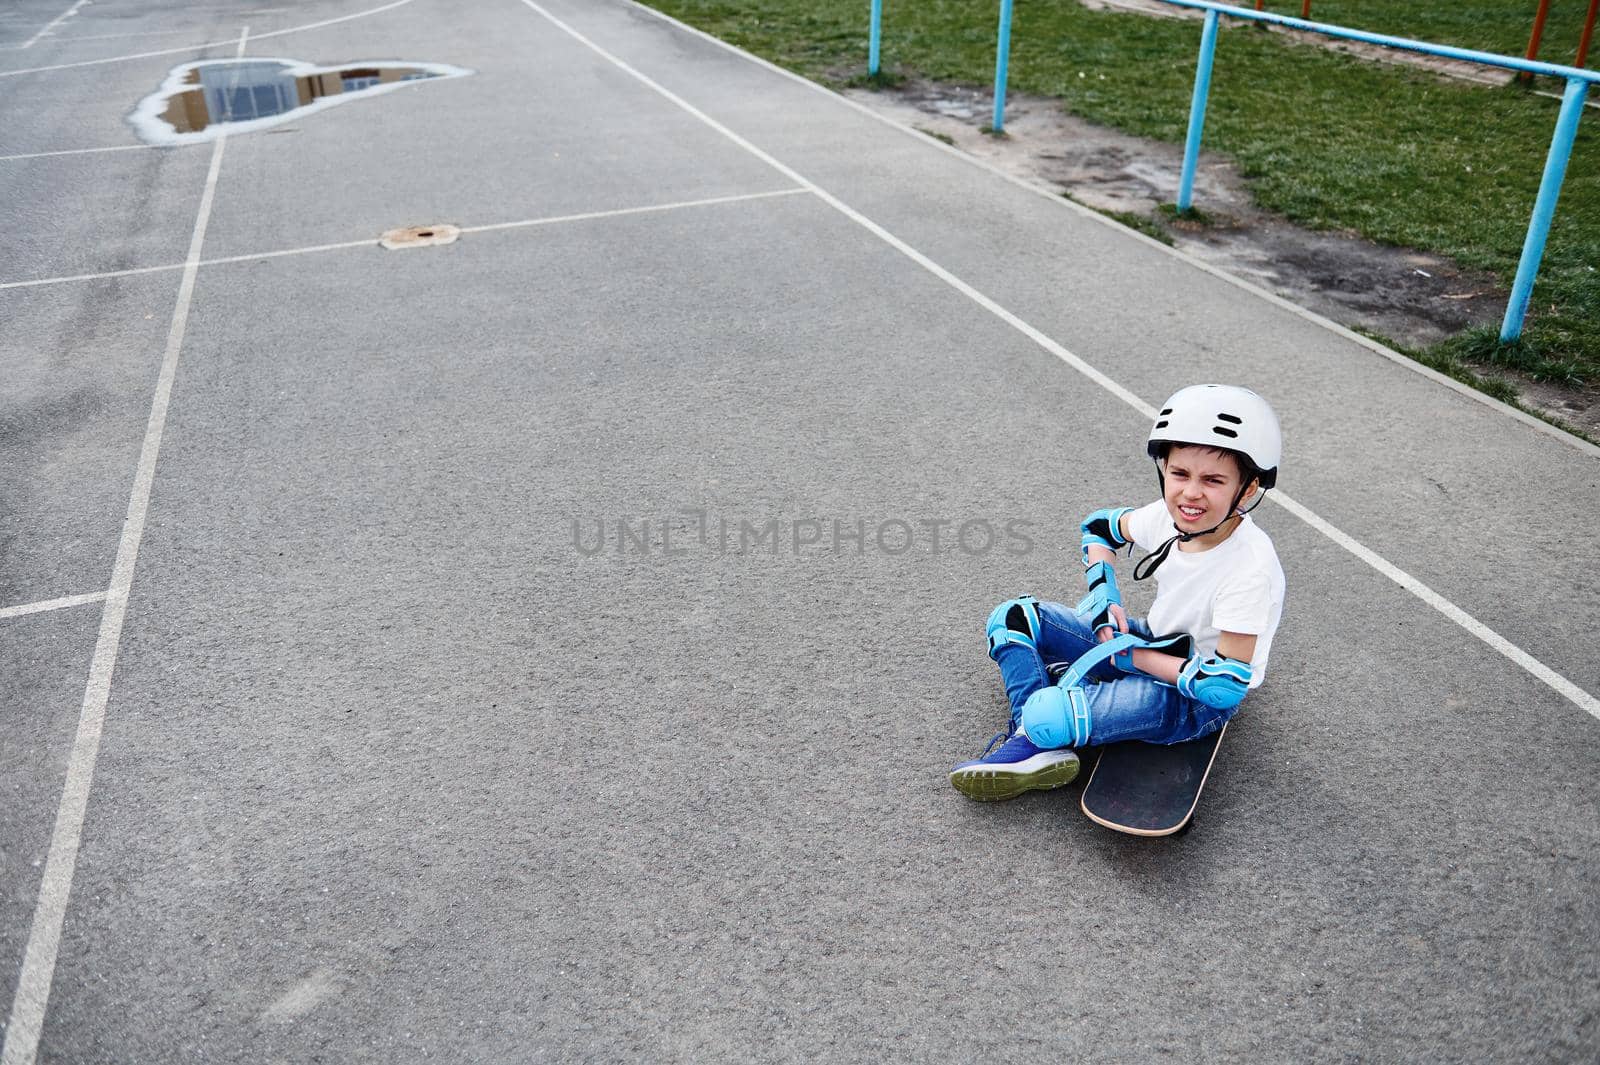 Boy in safety helmet sits on skateboard and focuses on putting on protective gear for skateboarder